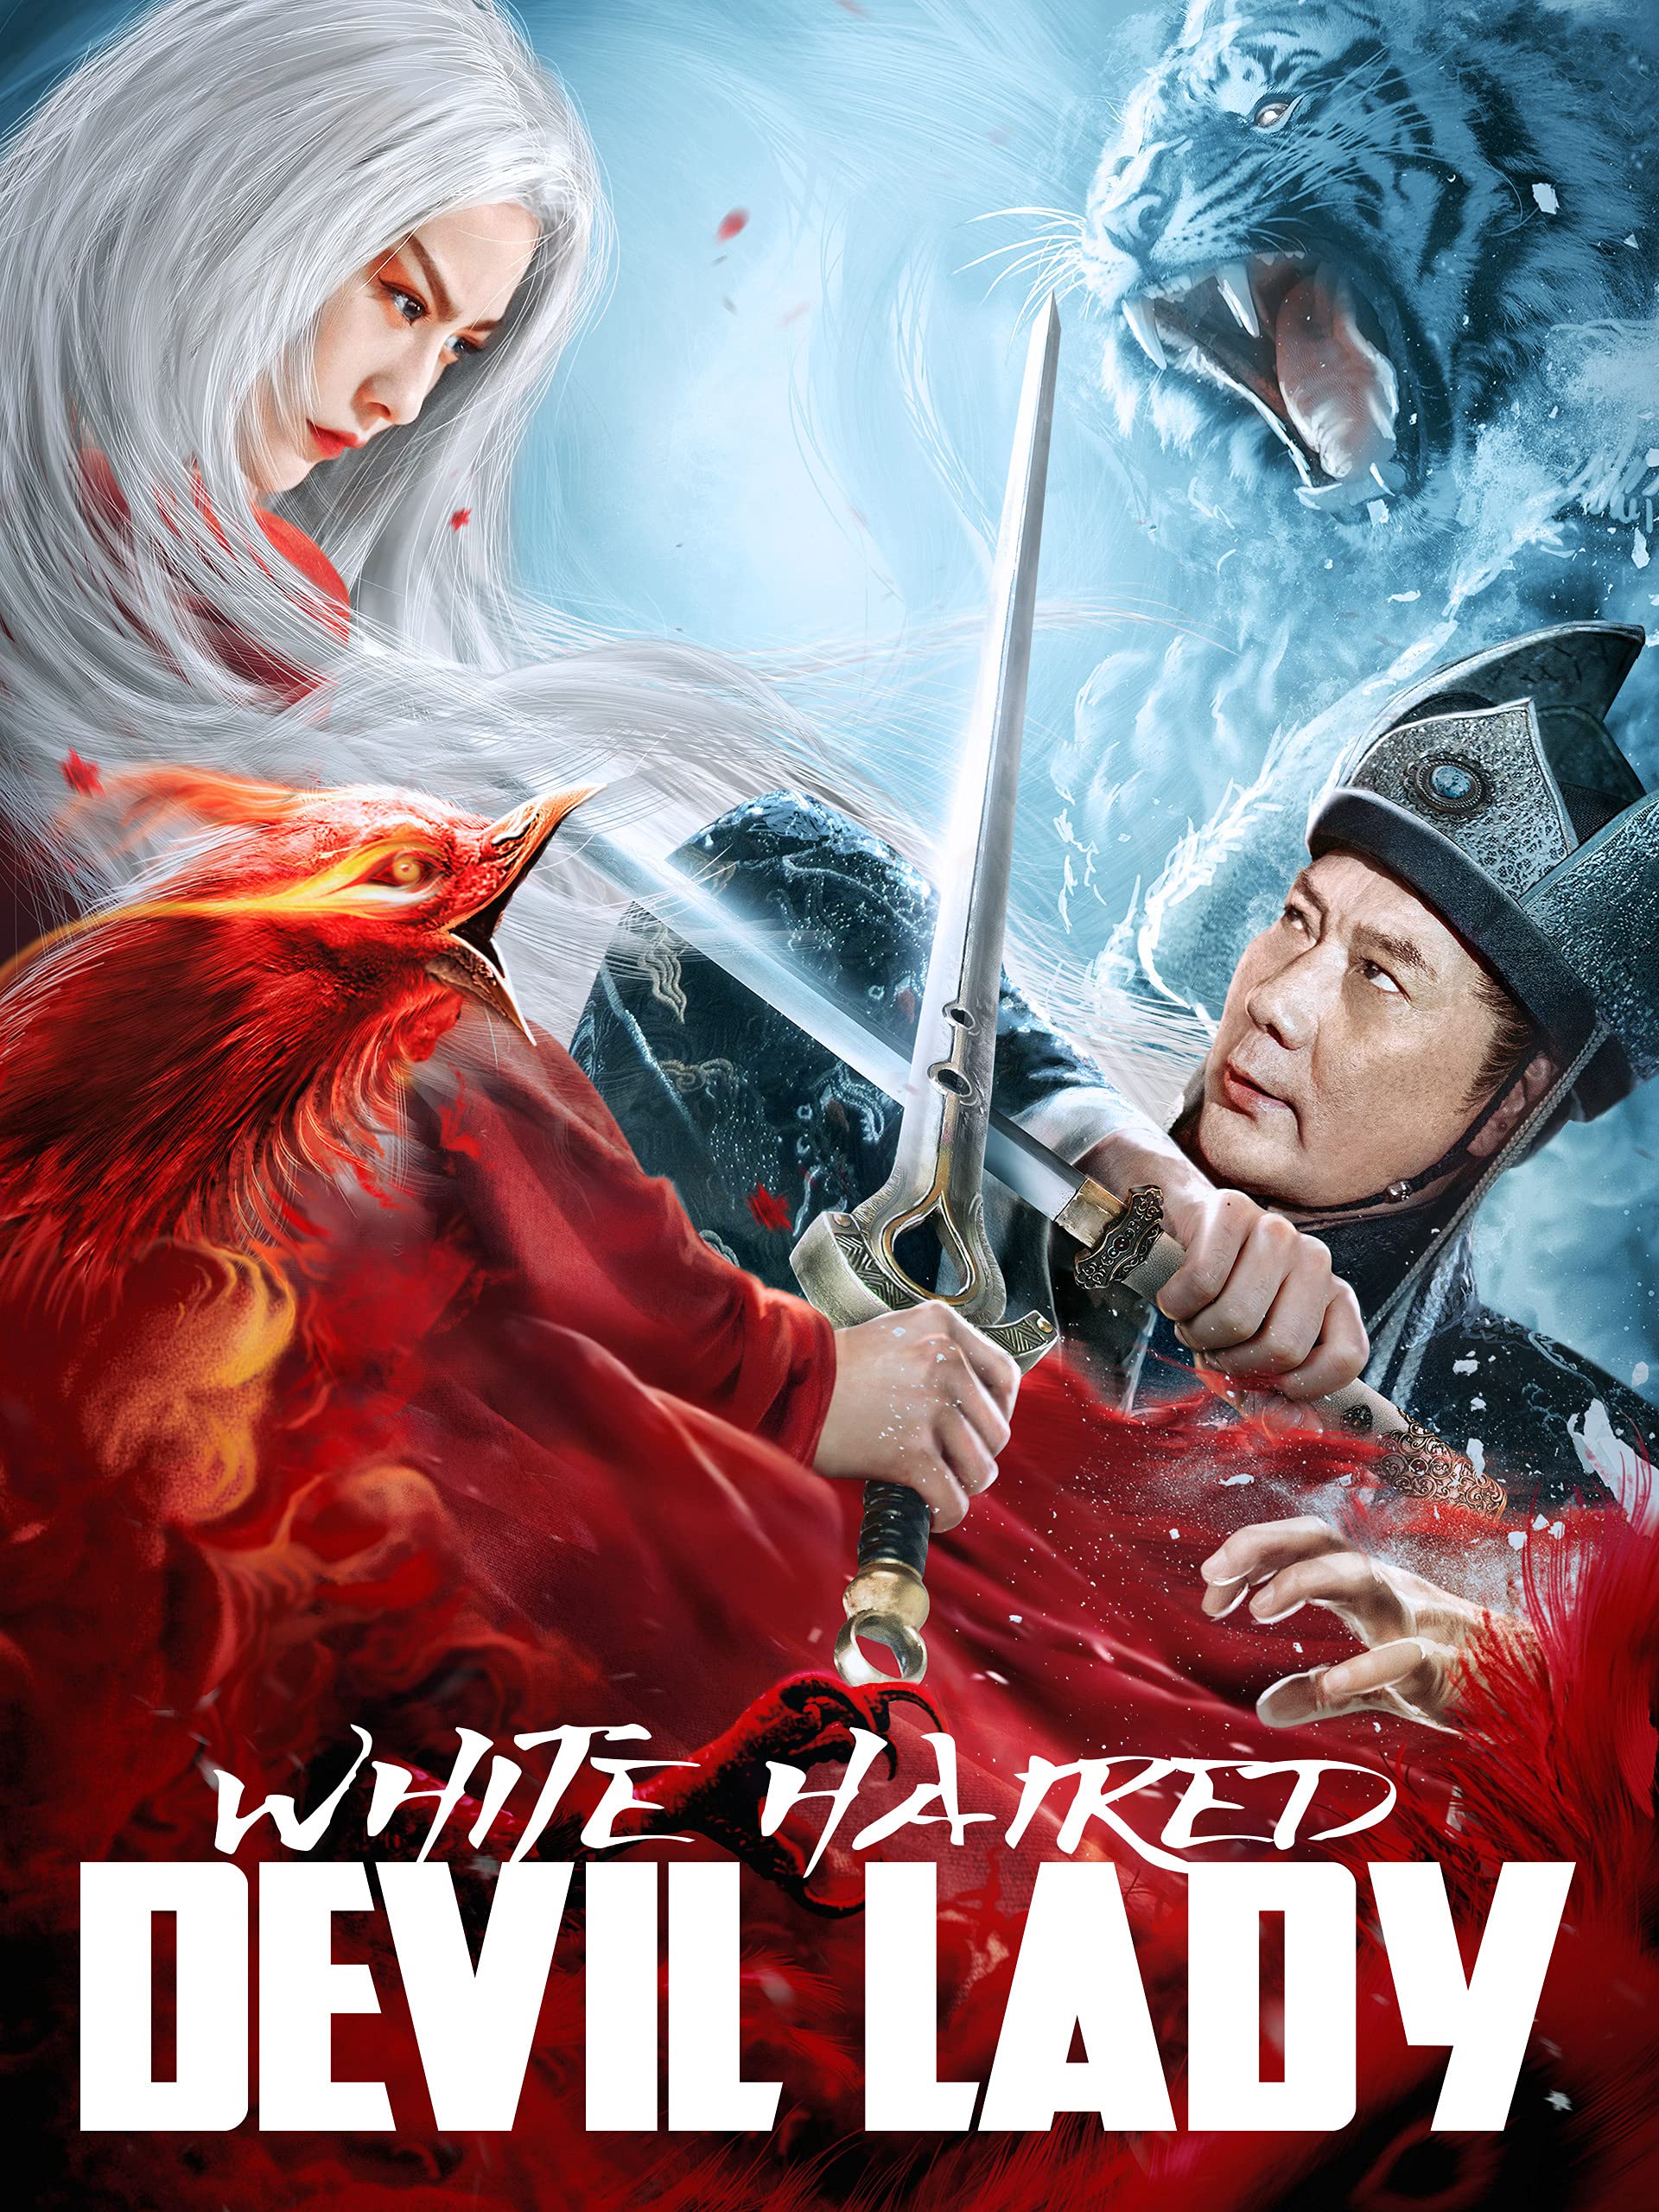 White Haired Devil Lady 2020 Hindi ORG Dual Audio 720p HDRip 954MB Download